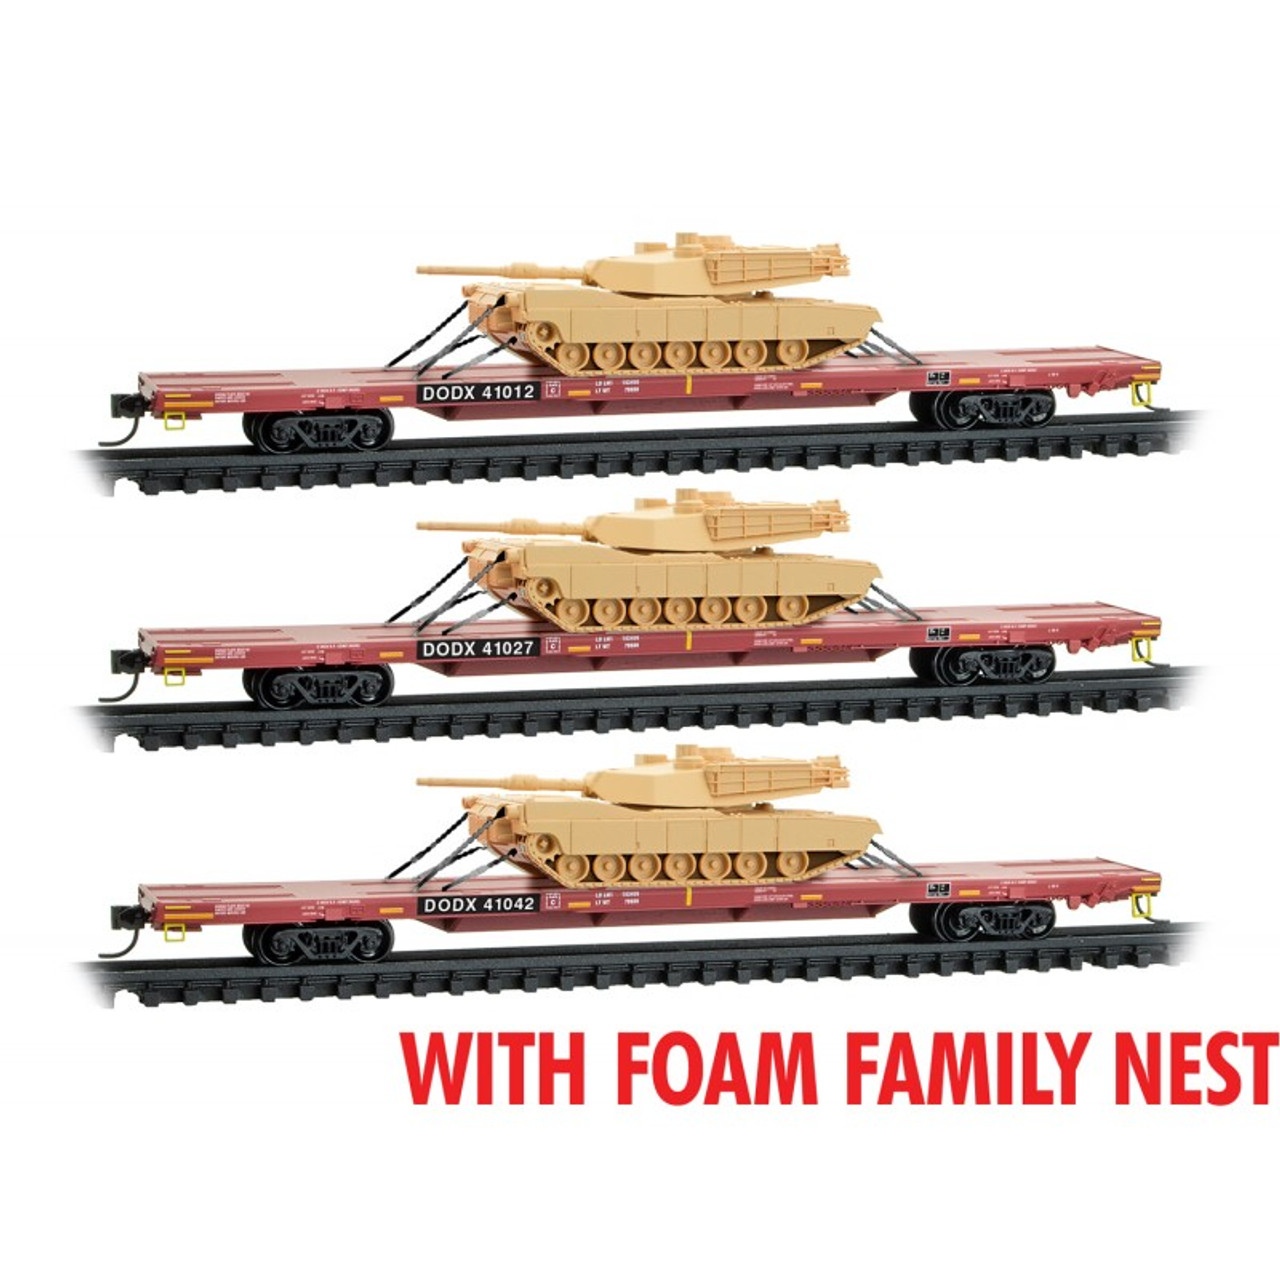 N Scale - Micro-Trains - 993 02 214 - Flatcar, 68 Foot, DODX Heavy-Duty - Department of Defense - 3-Pack